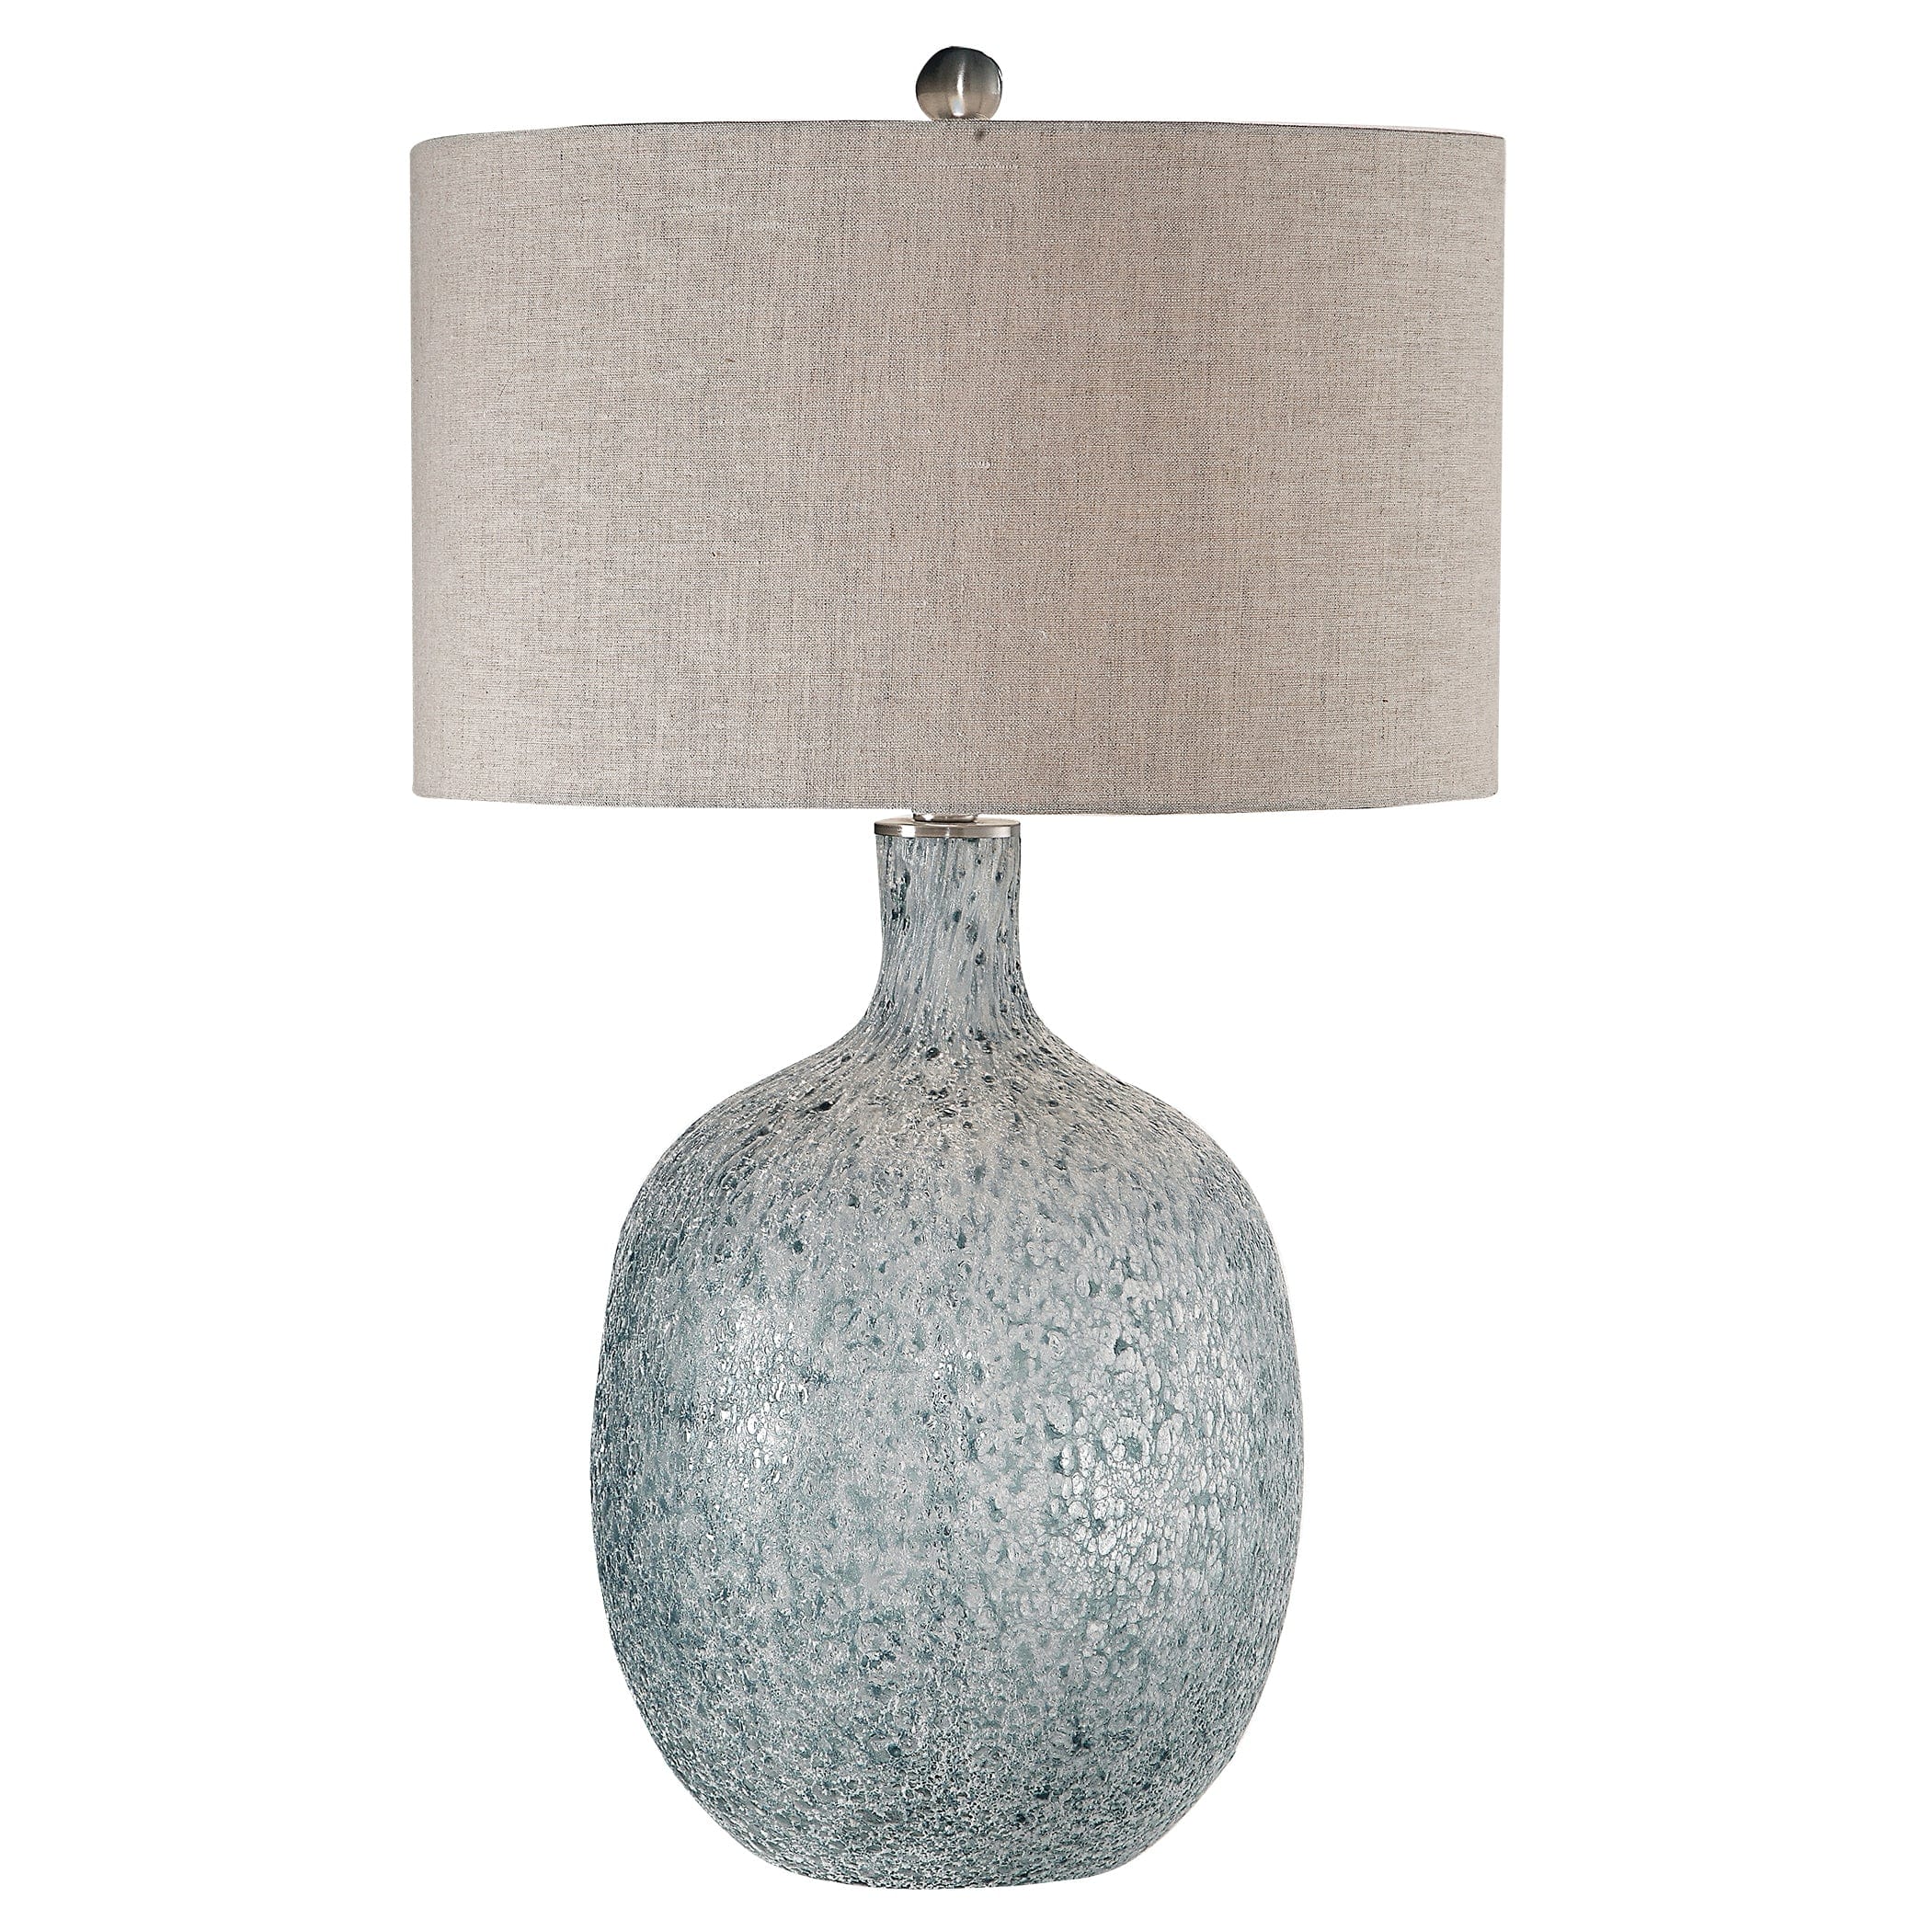 Oceaonna Glass Table Lamp Uttermost